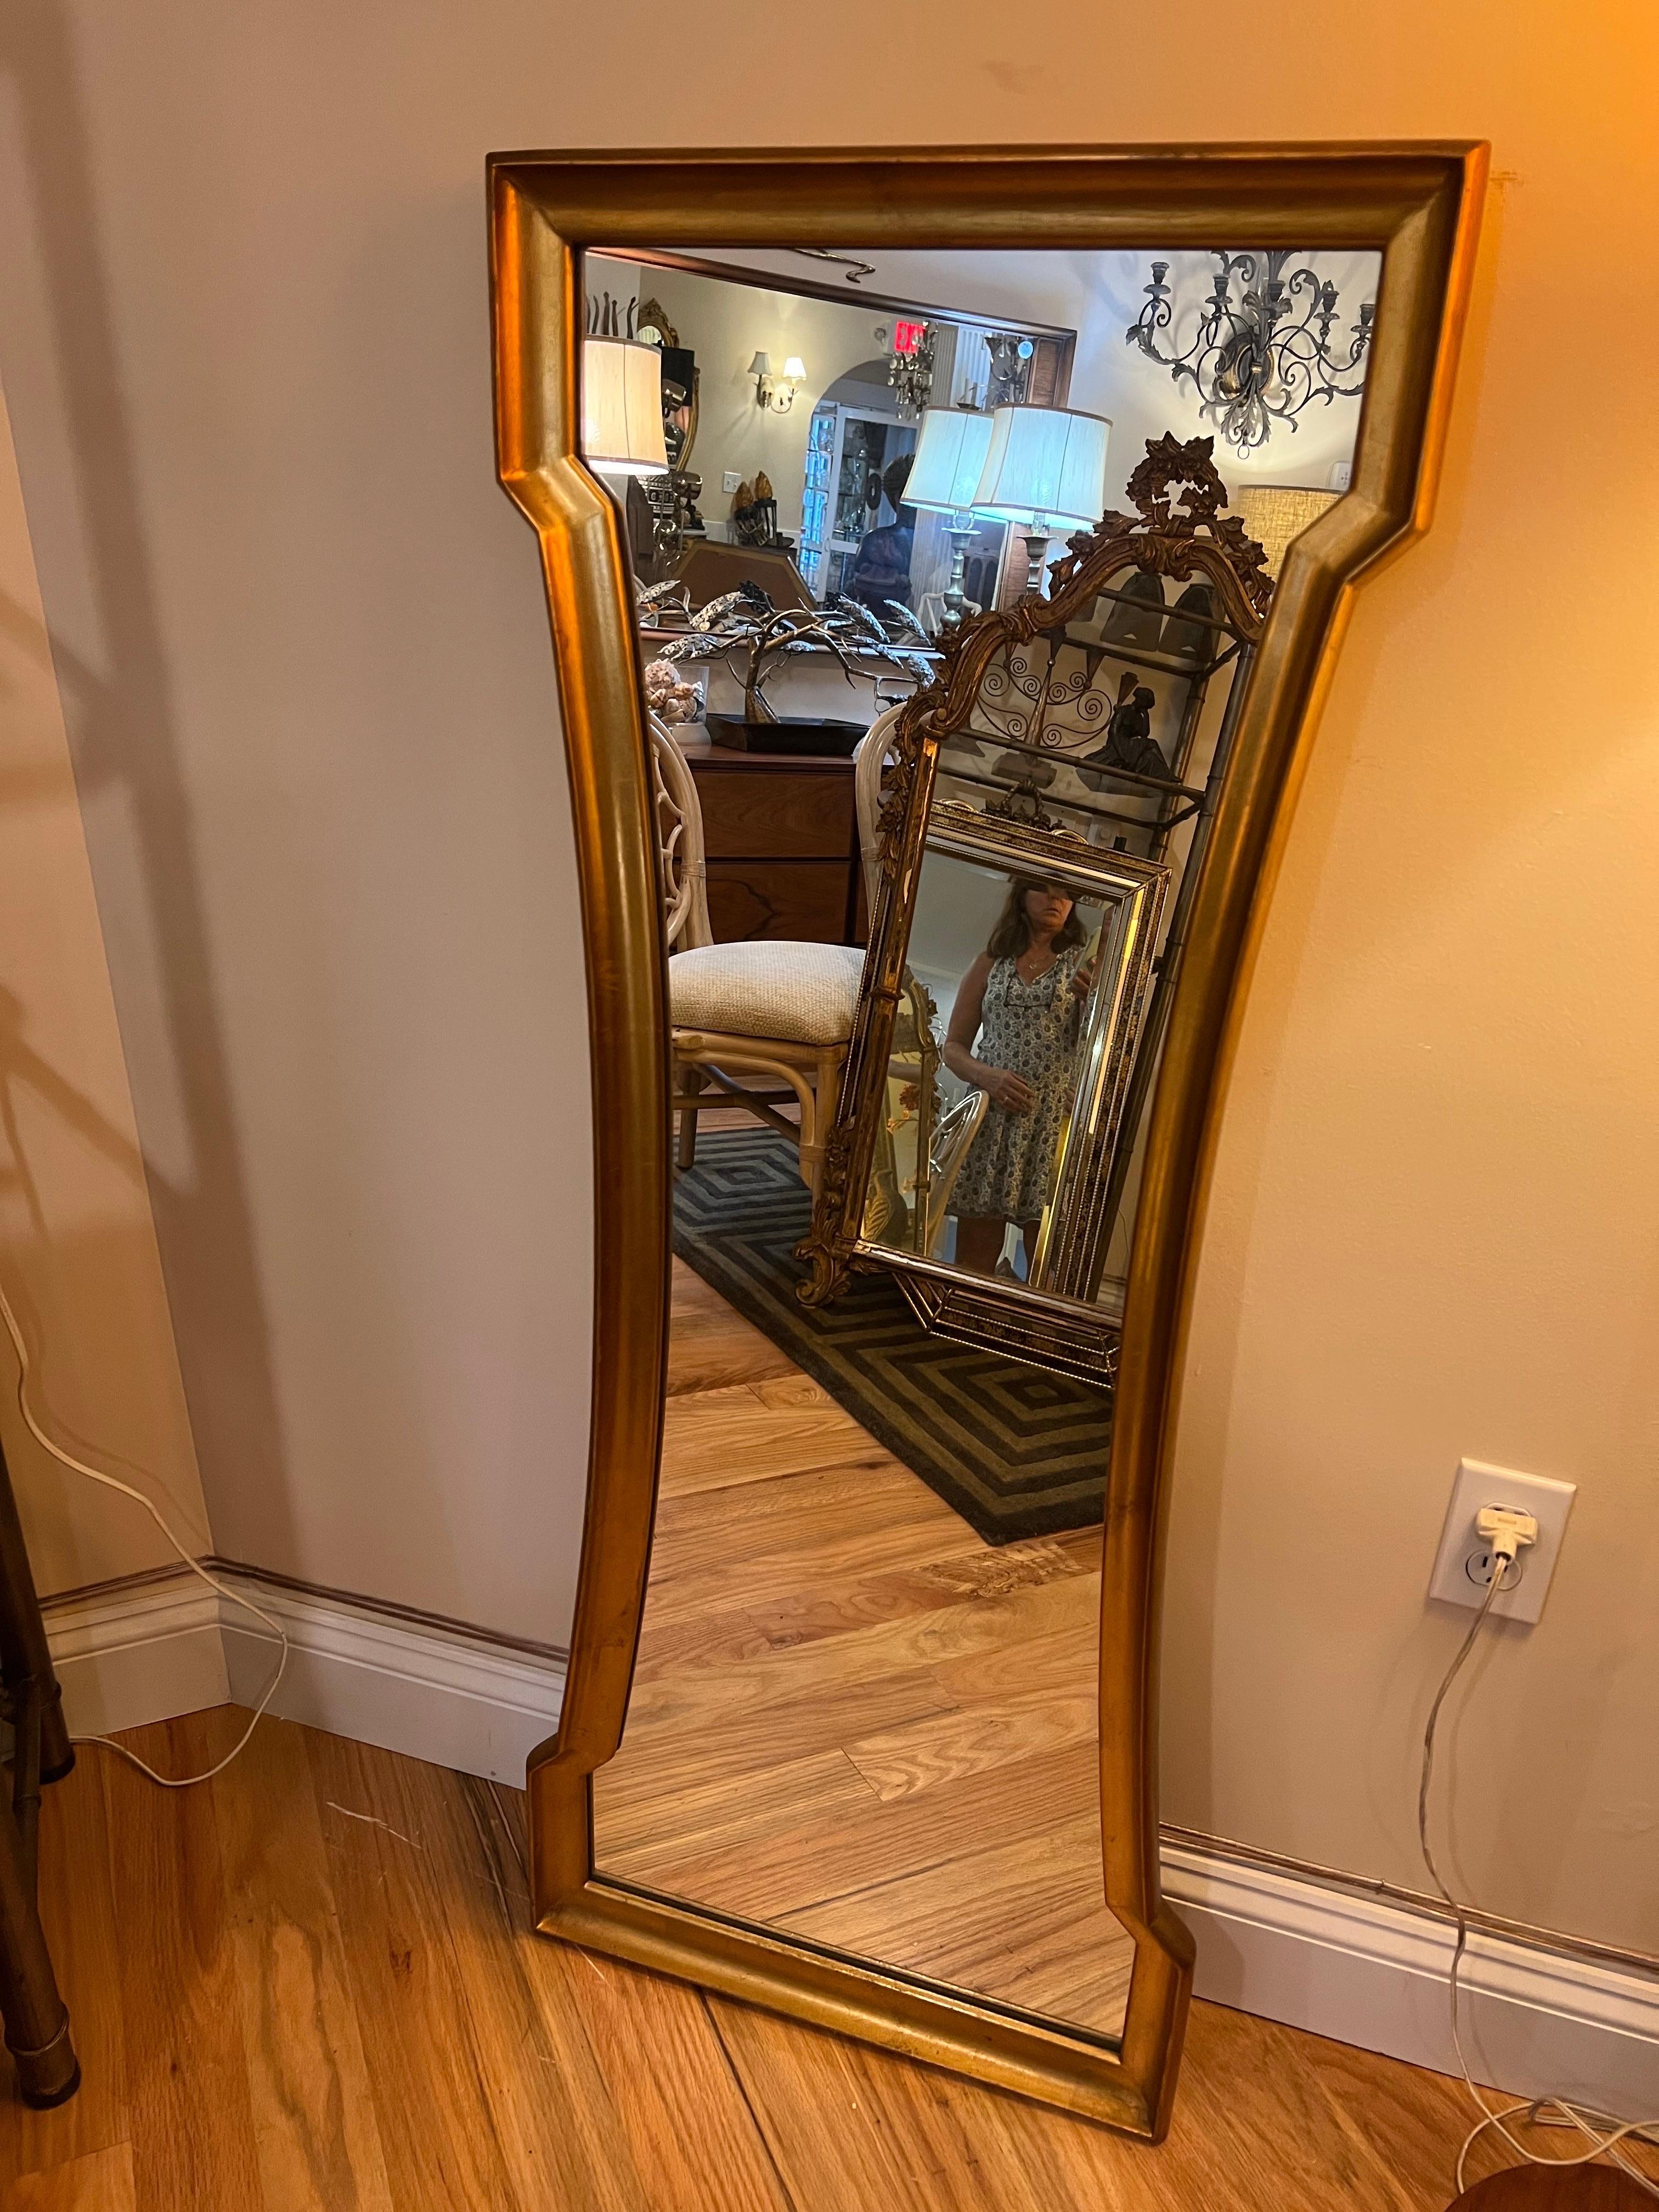 Hourglass gold leaf mirror by Weiman. Unique shape to bring pizzazz to any room. Hang either way. Use above a vanity or in a hallway. Or best as a vanity mirror above a sink with some busy wallpaper. At the mirrors most narrowest part in the center